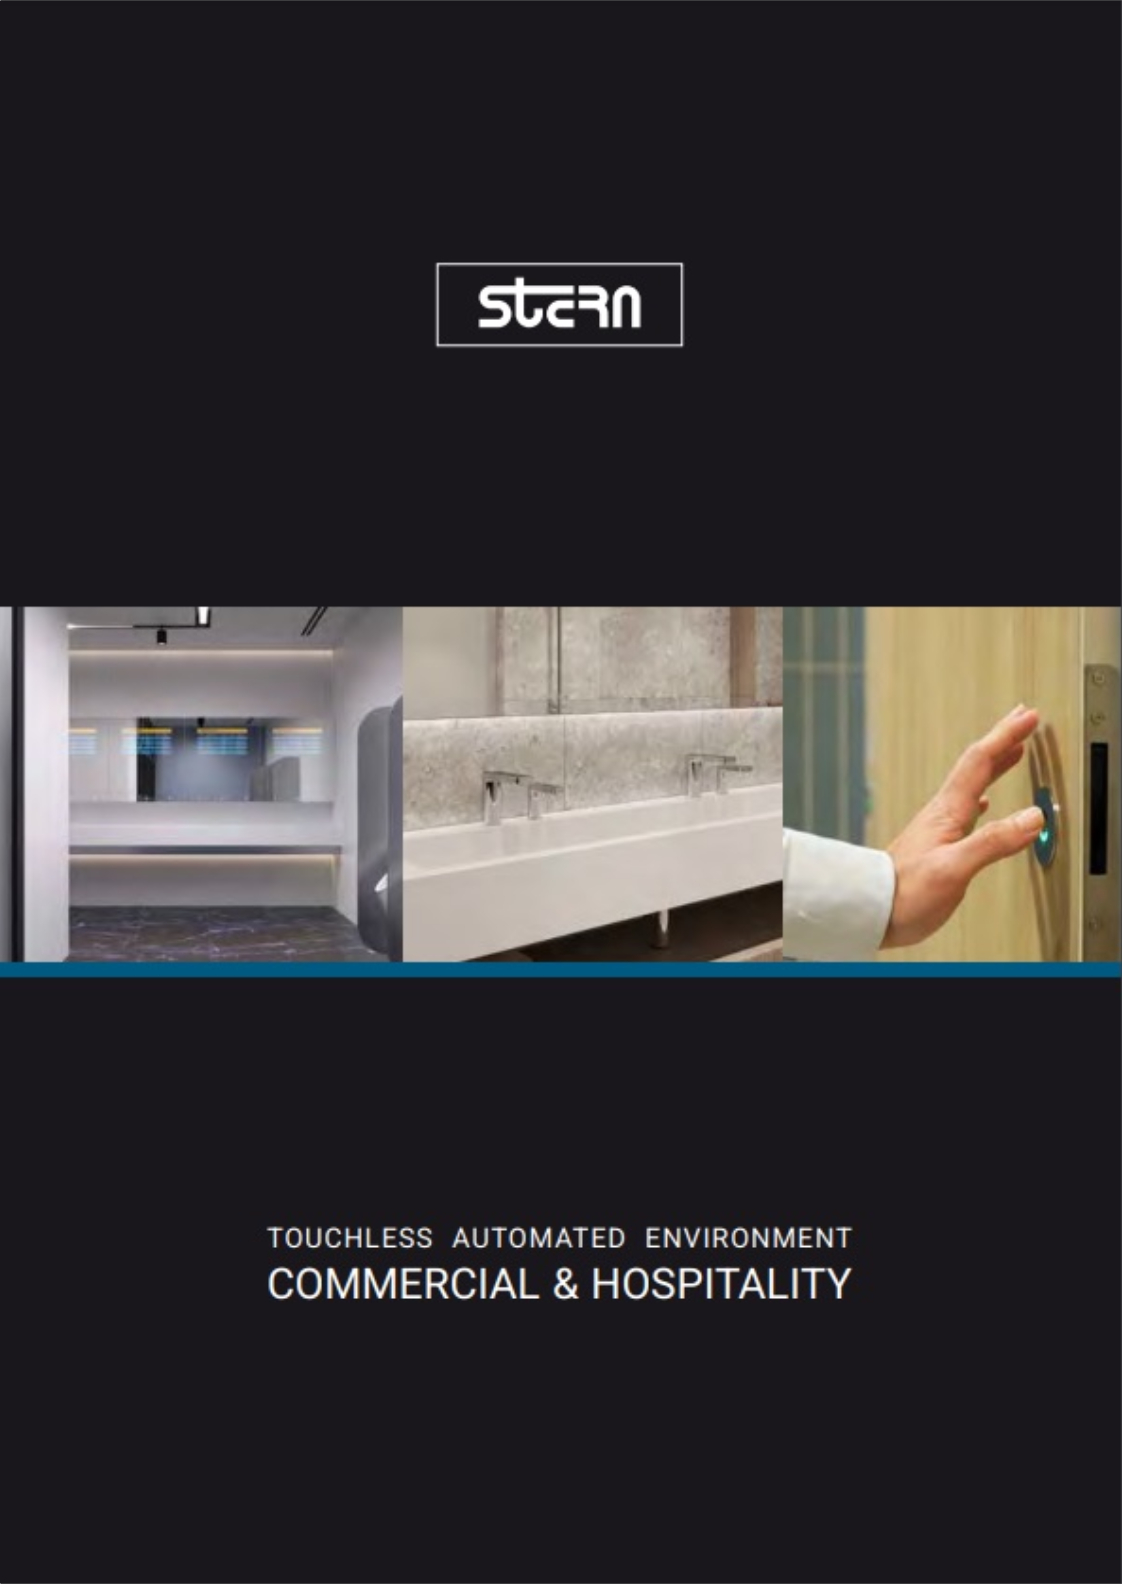 Touchless-automated-environment-commercial-and-hospitality